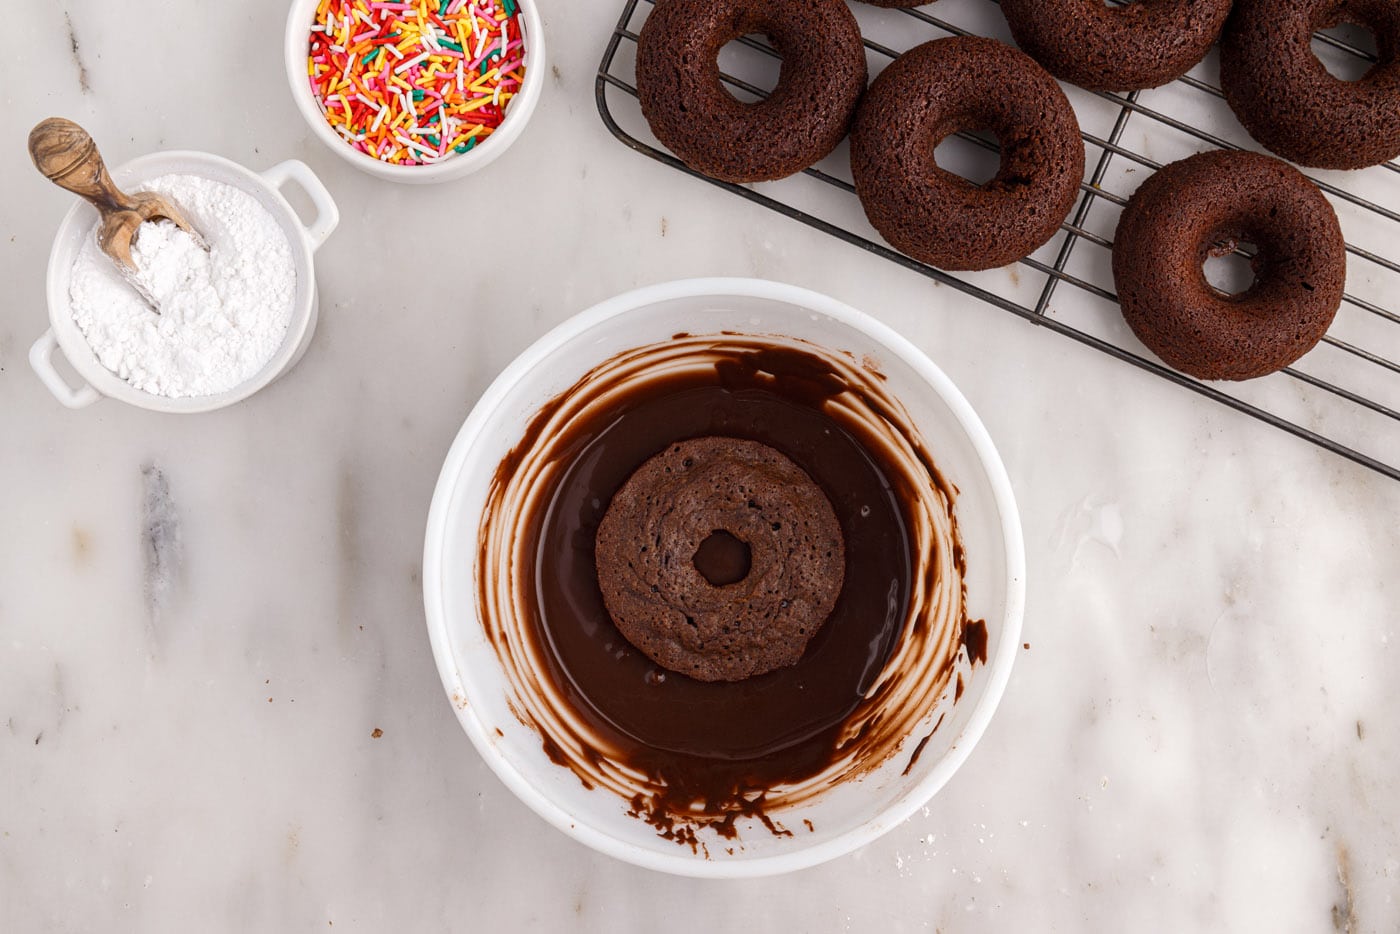 dipping a donut into chocolate glaze